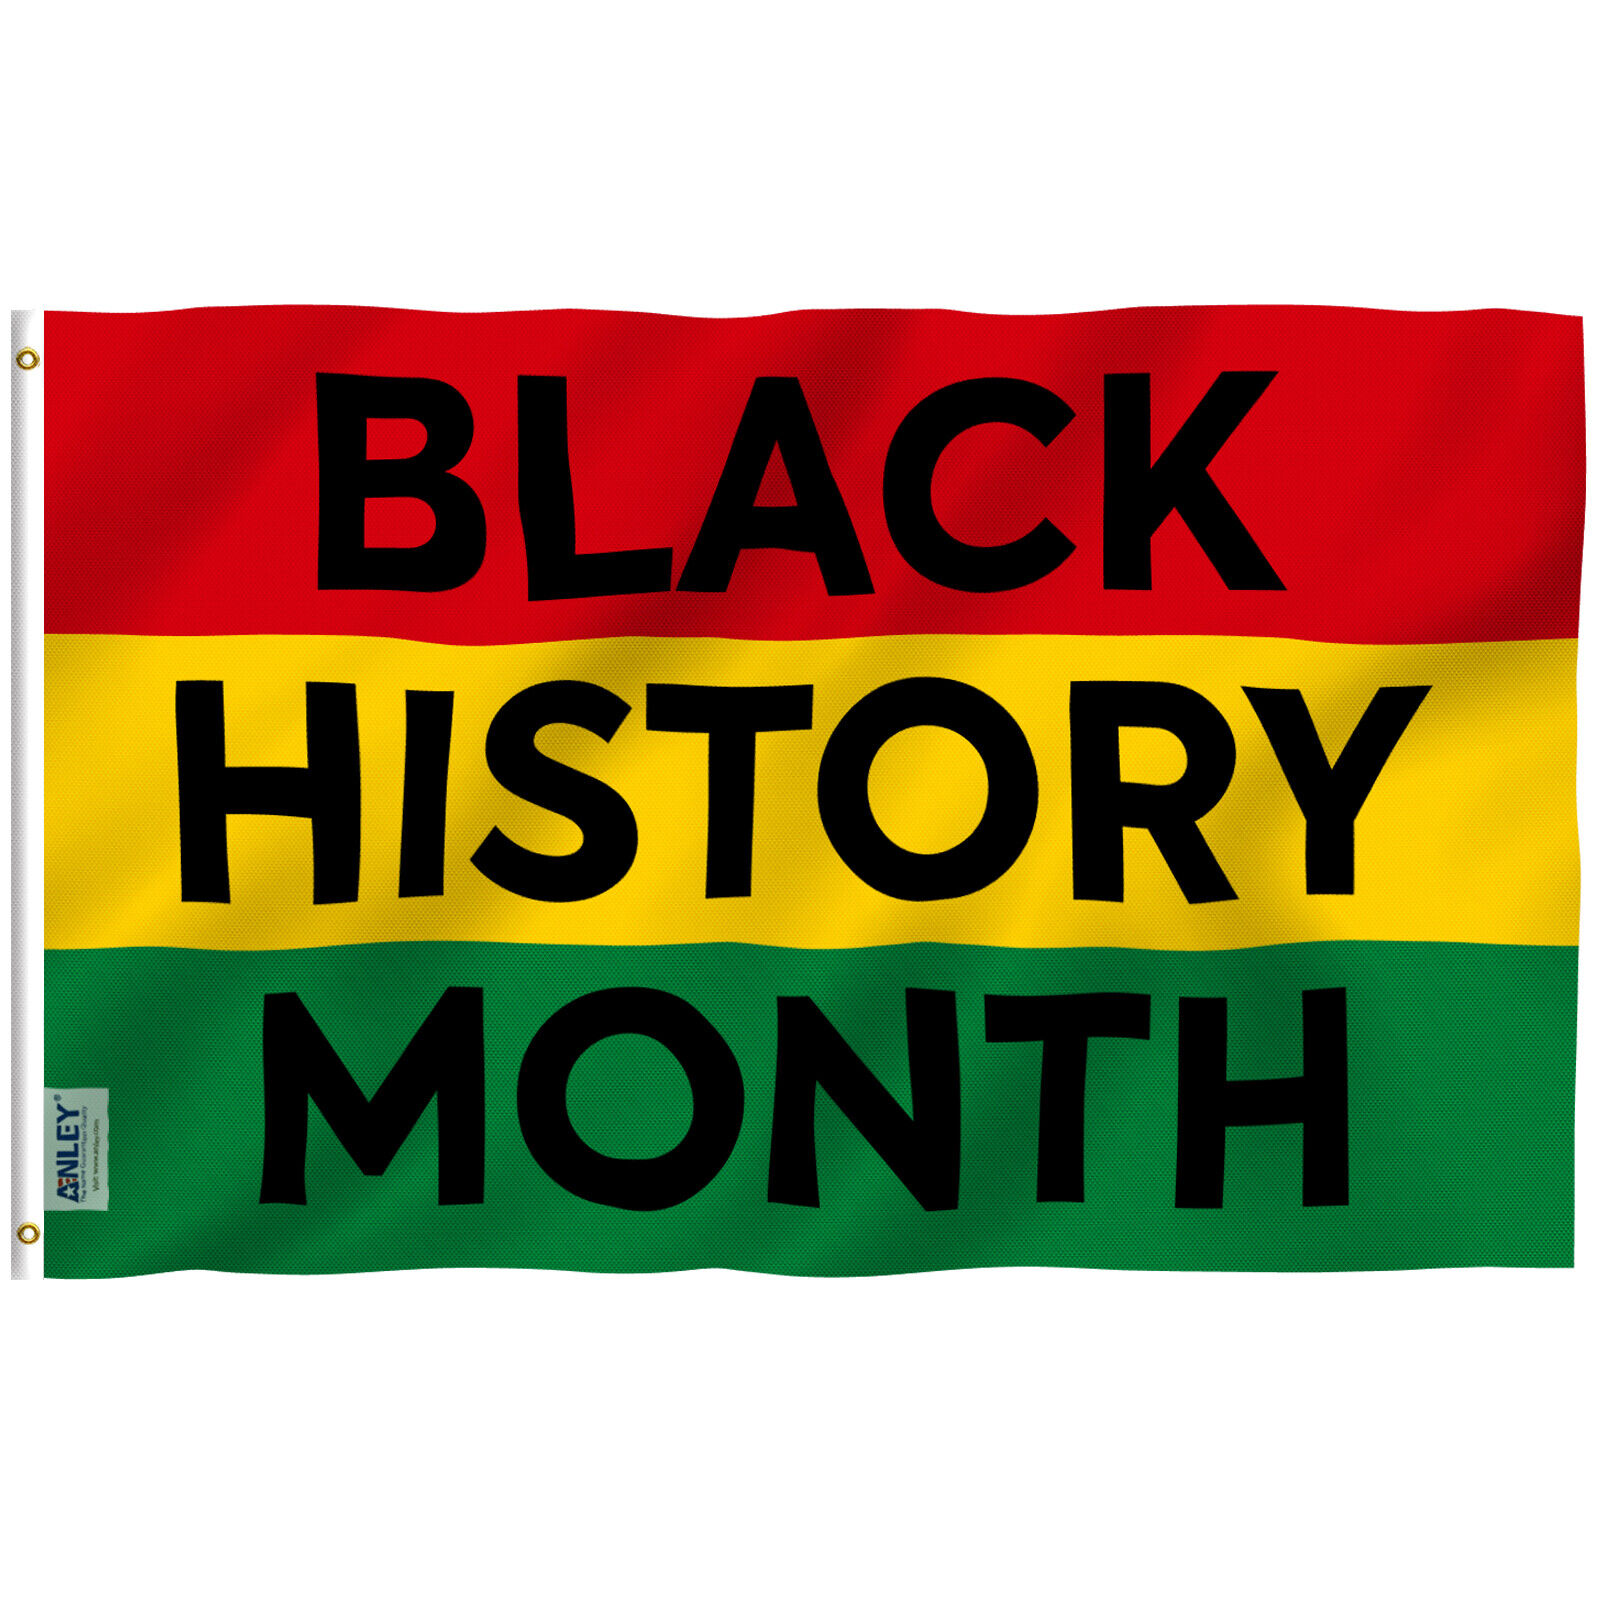 Anley Fly Breeze 3x5 Feet Black History Month Flag - African Americans Flags